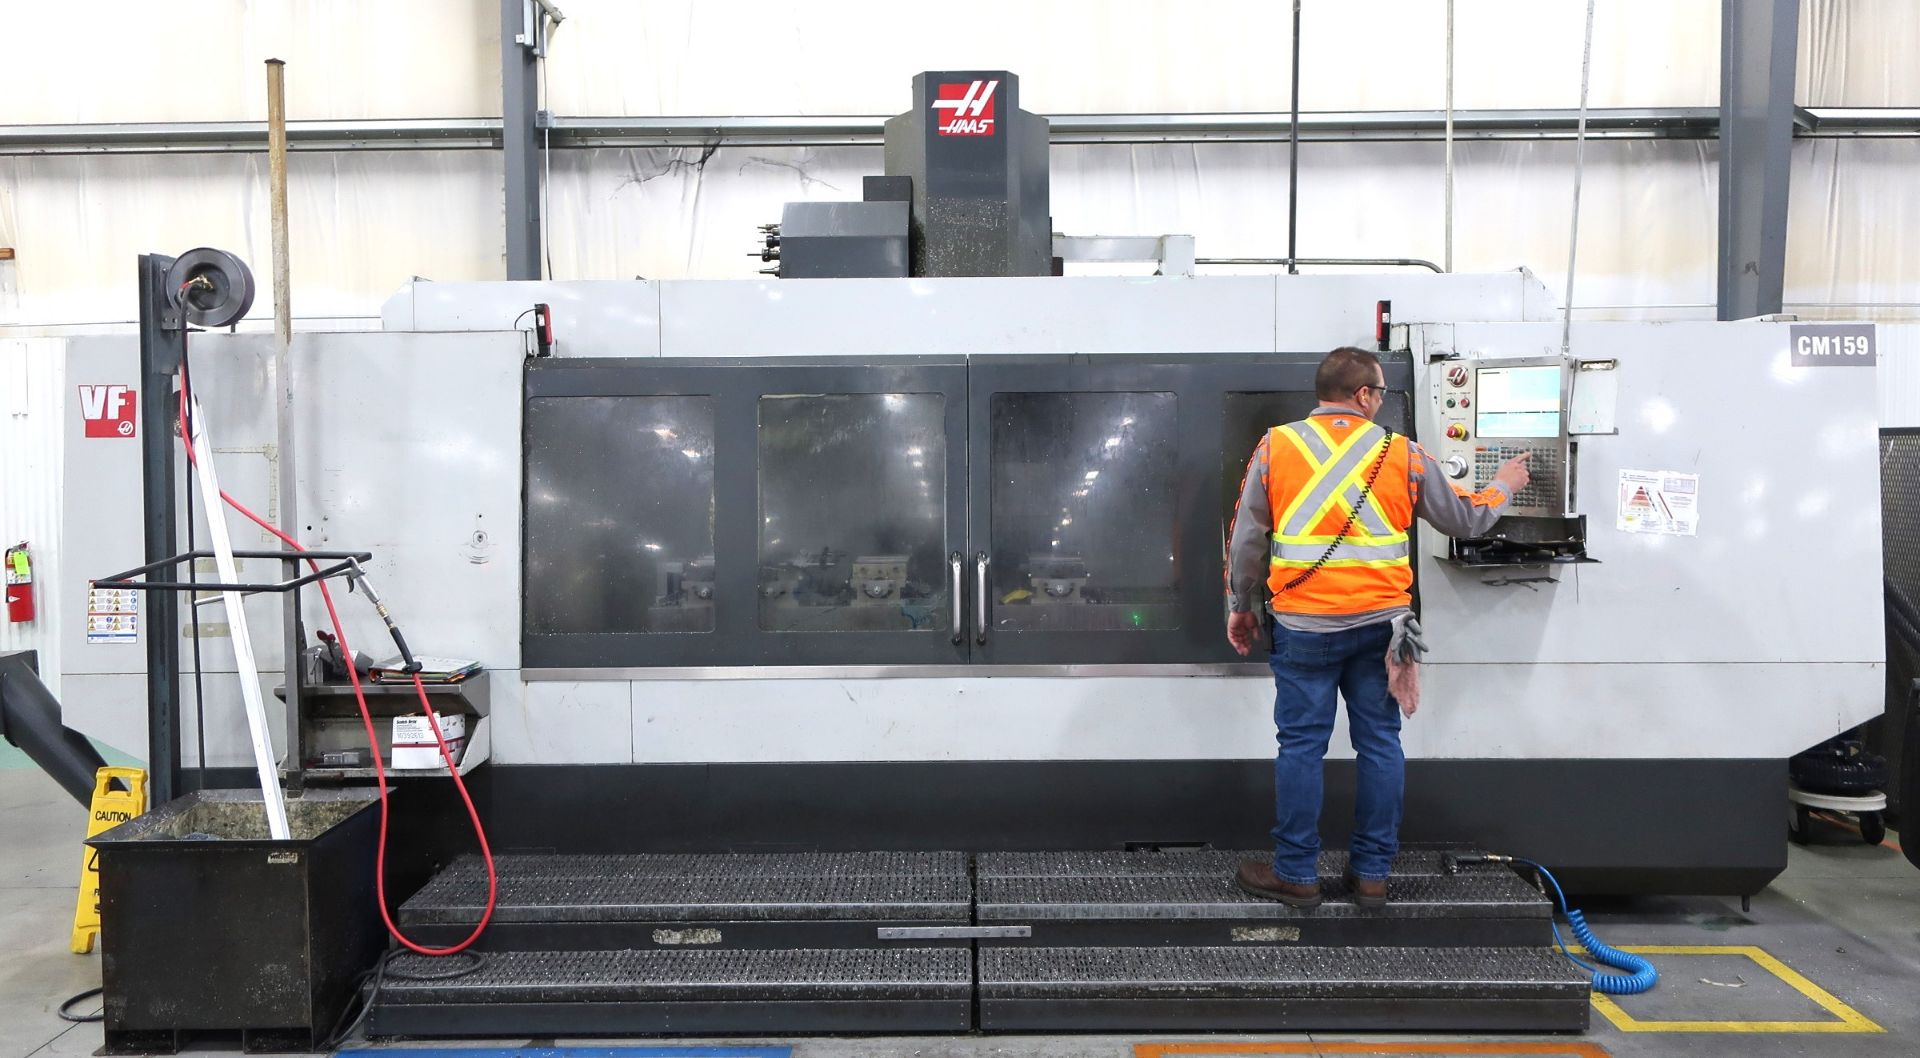 28" x 120" HAAS VF10/40 CNC VERTICAL MACHINING CENTER, NEW 2013 - Image 21 of 21